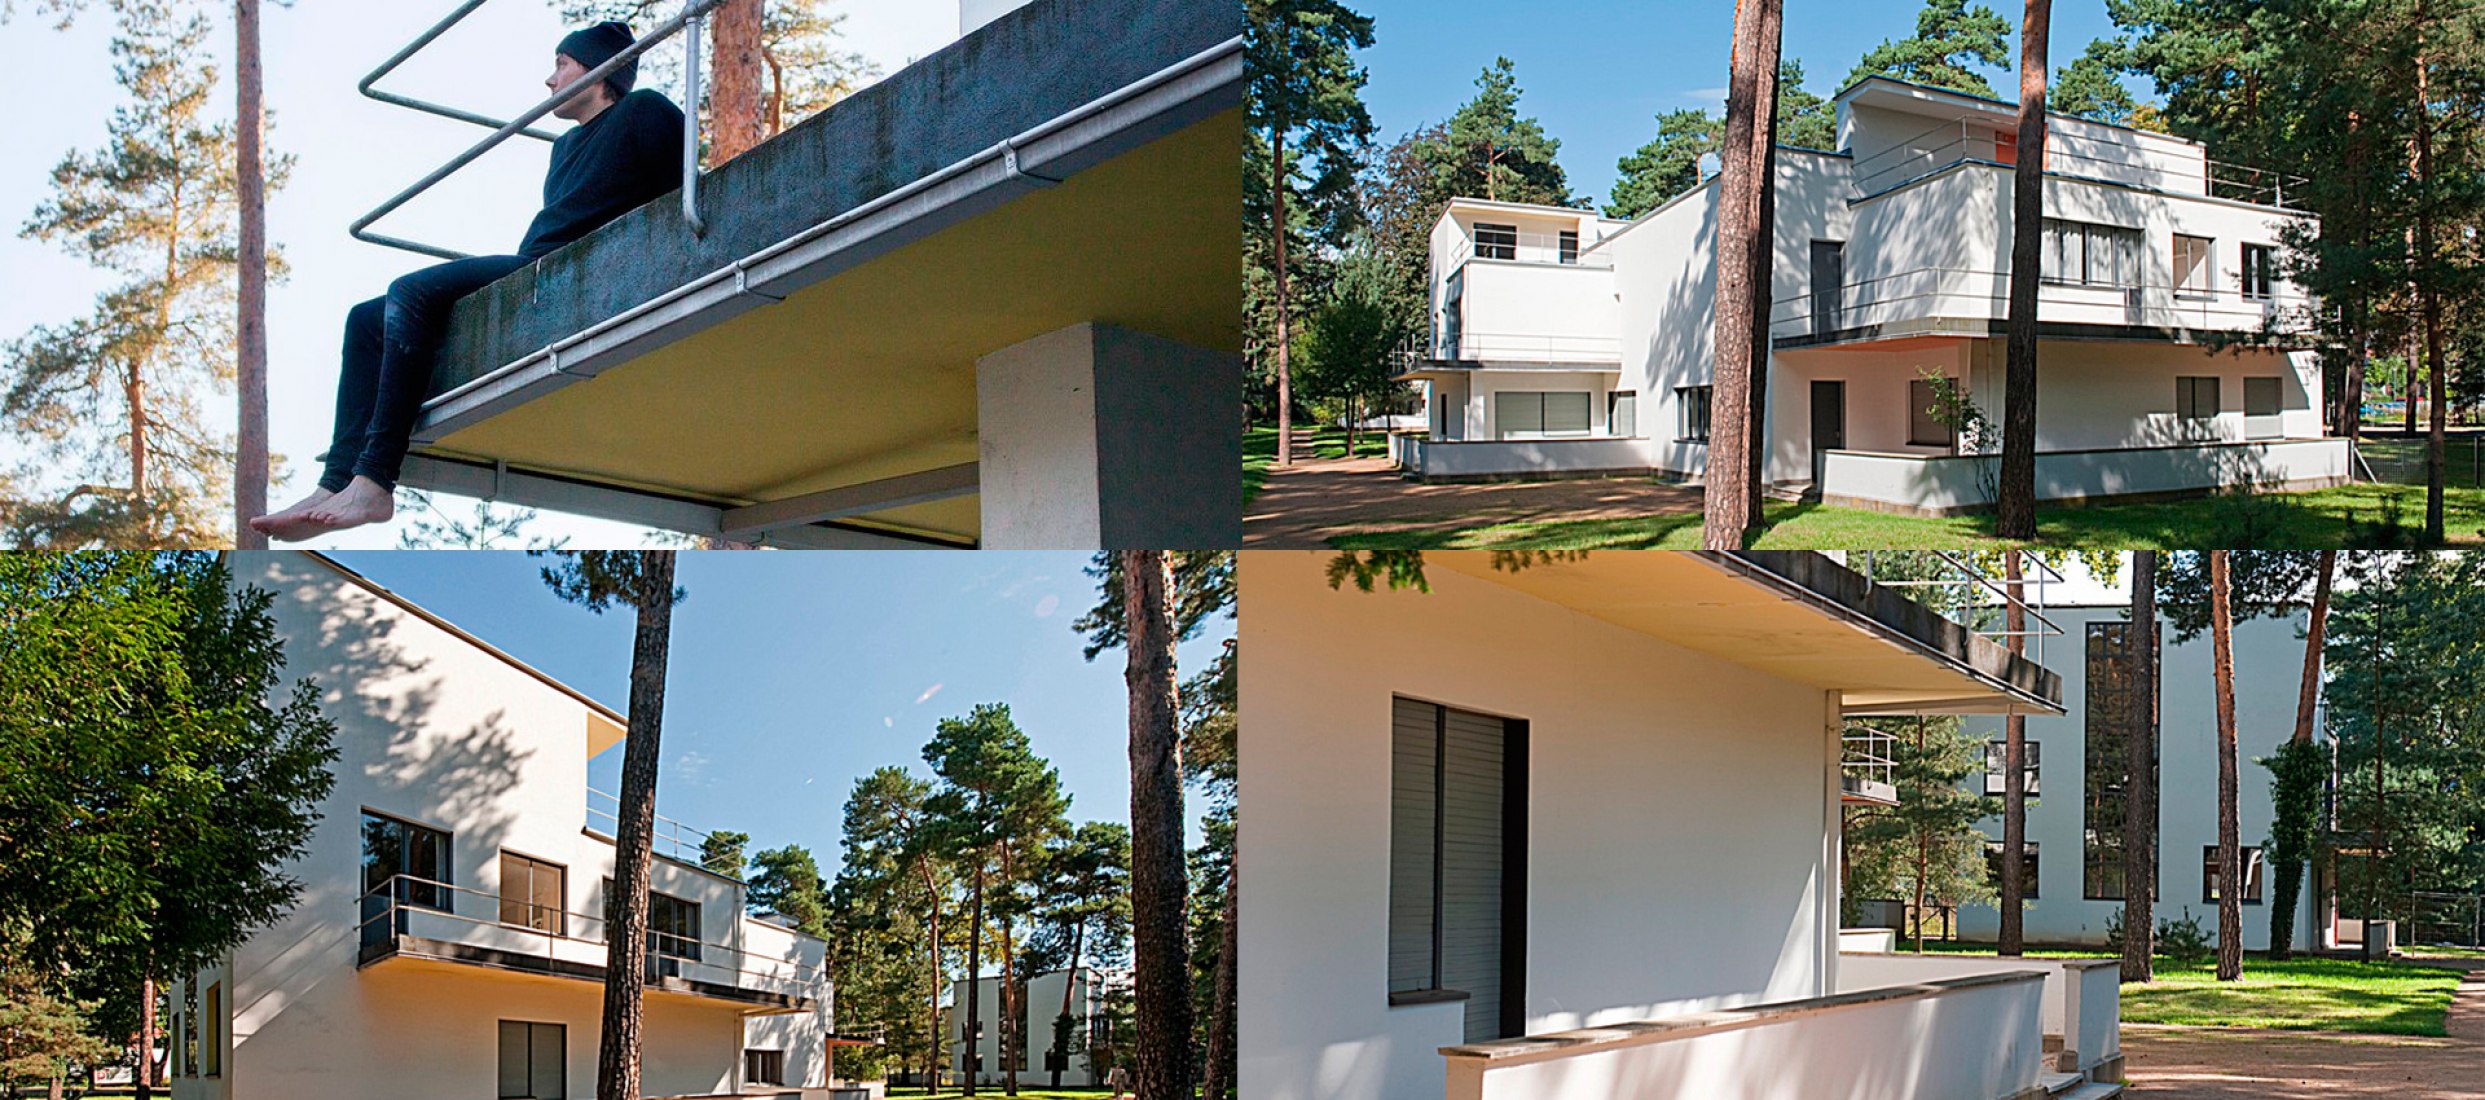 Open Call to live and work at the Bauhaus Residence